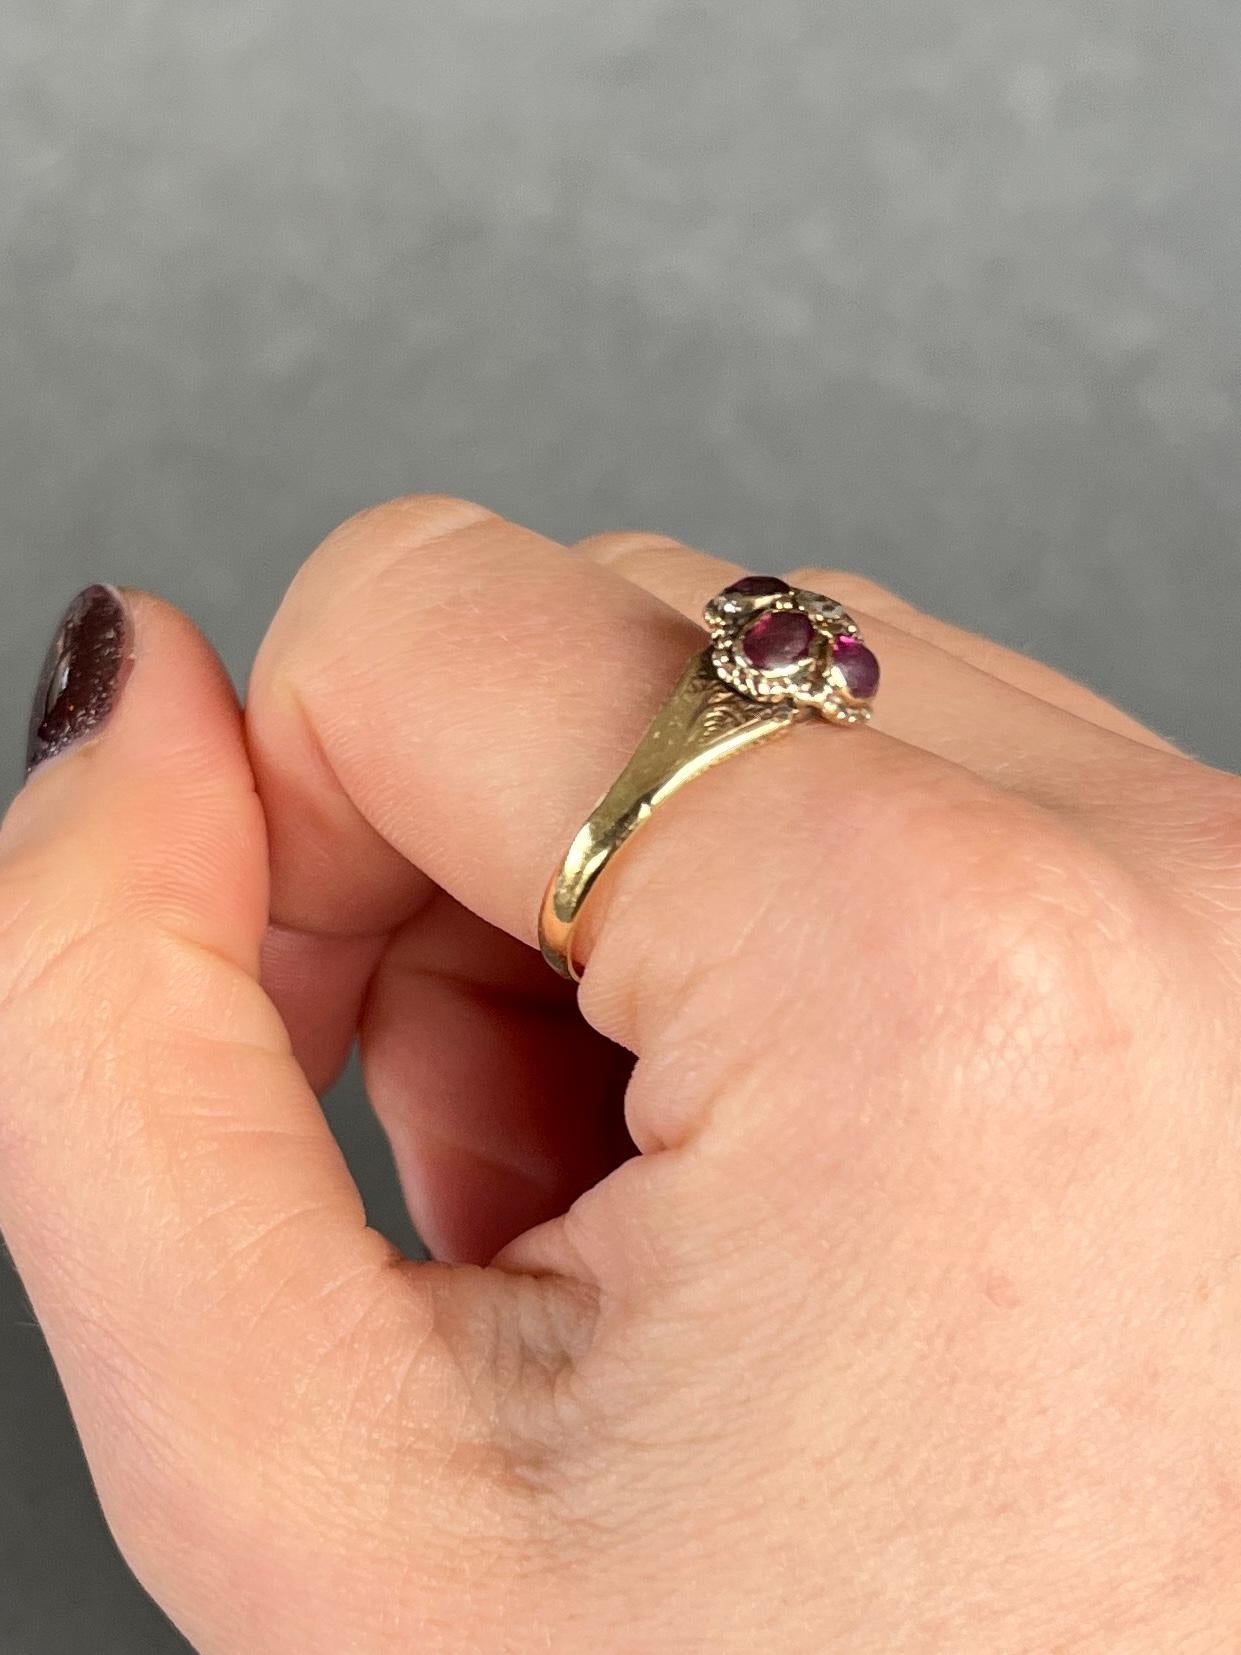 This stunner holds four deep pink tourmaline stones totalling 80pts and at the centre sits a 5pt rose cut diamond. They are set almost flush within the 15ct gold band. 

Ring Size: S or 9    
Head Width: 10mm

Weight: 2.9g